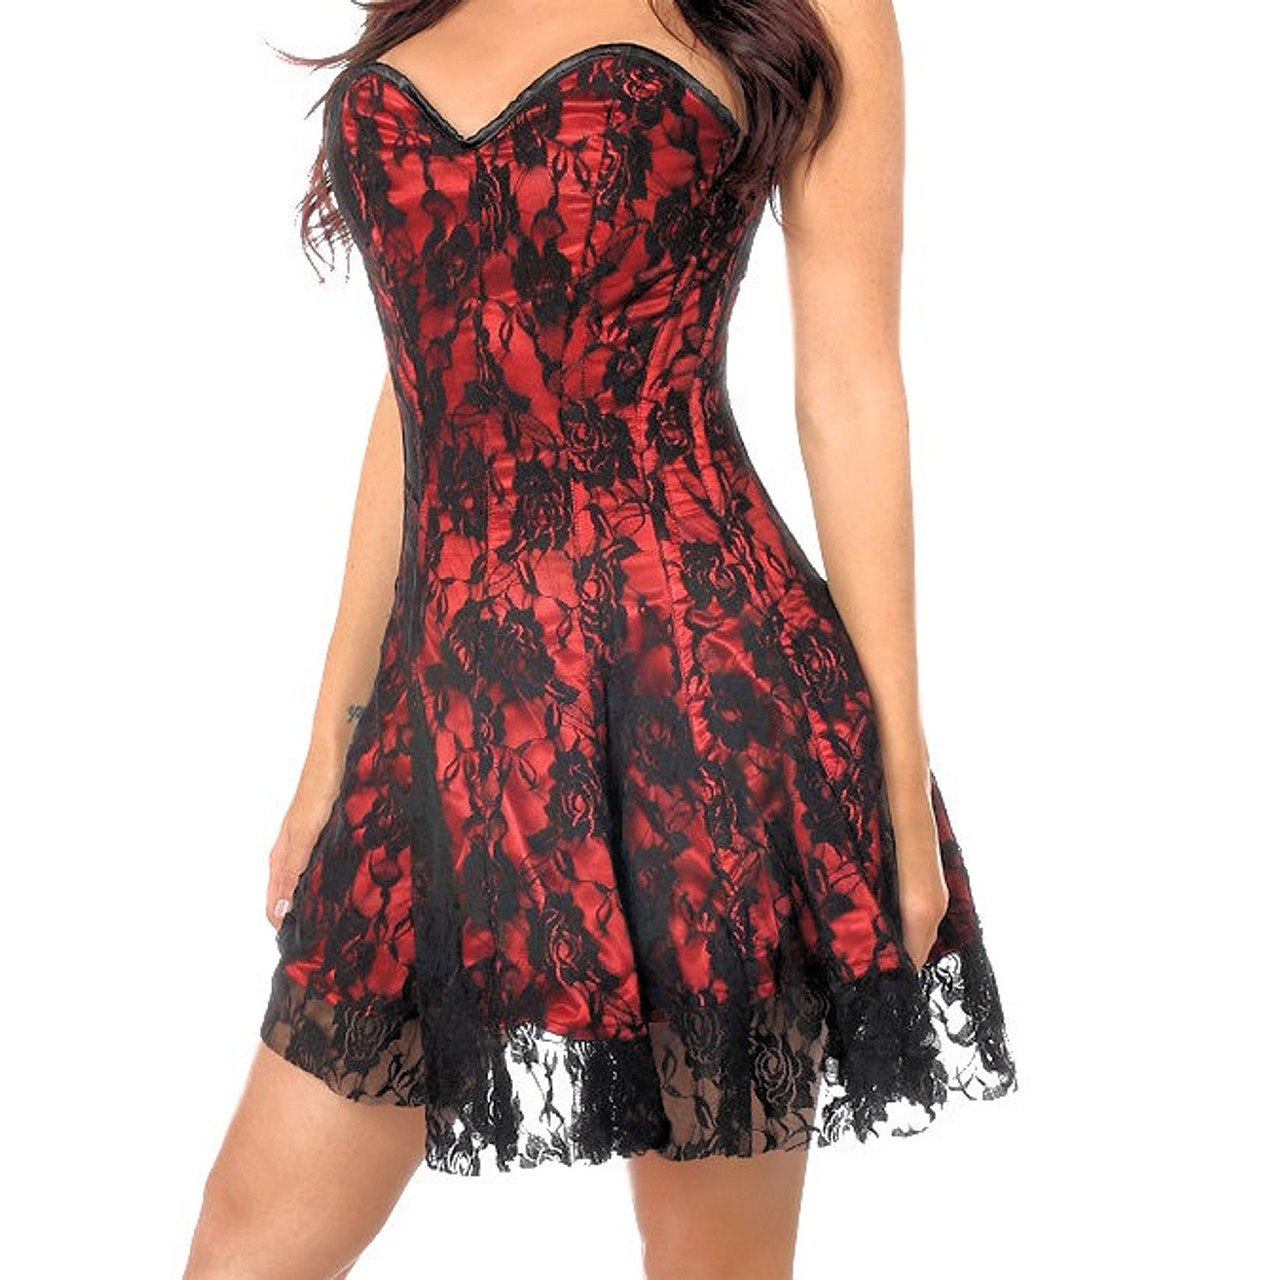 Red satin lace up corset Dress